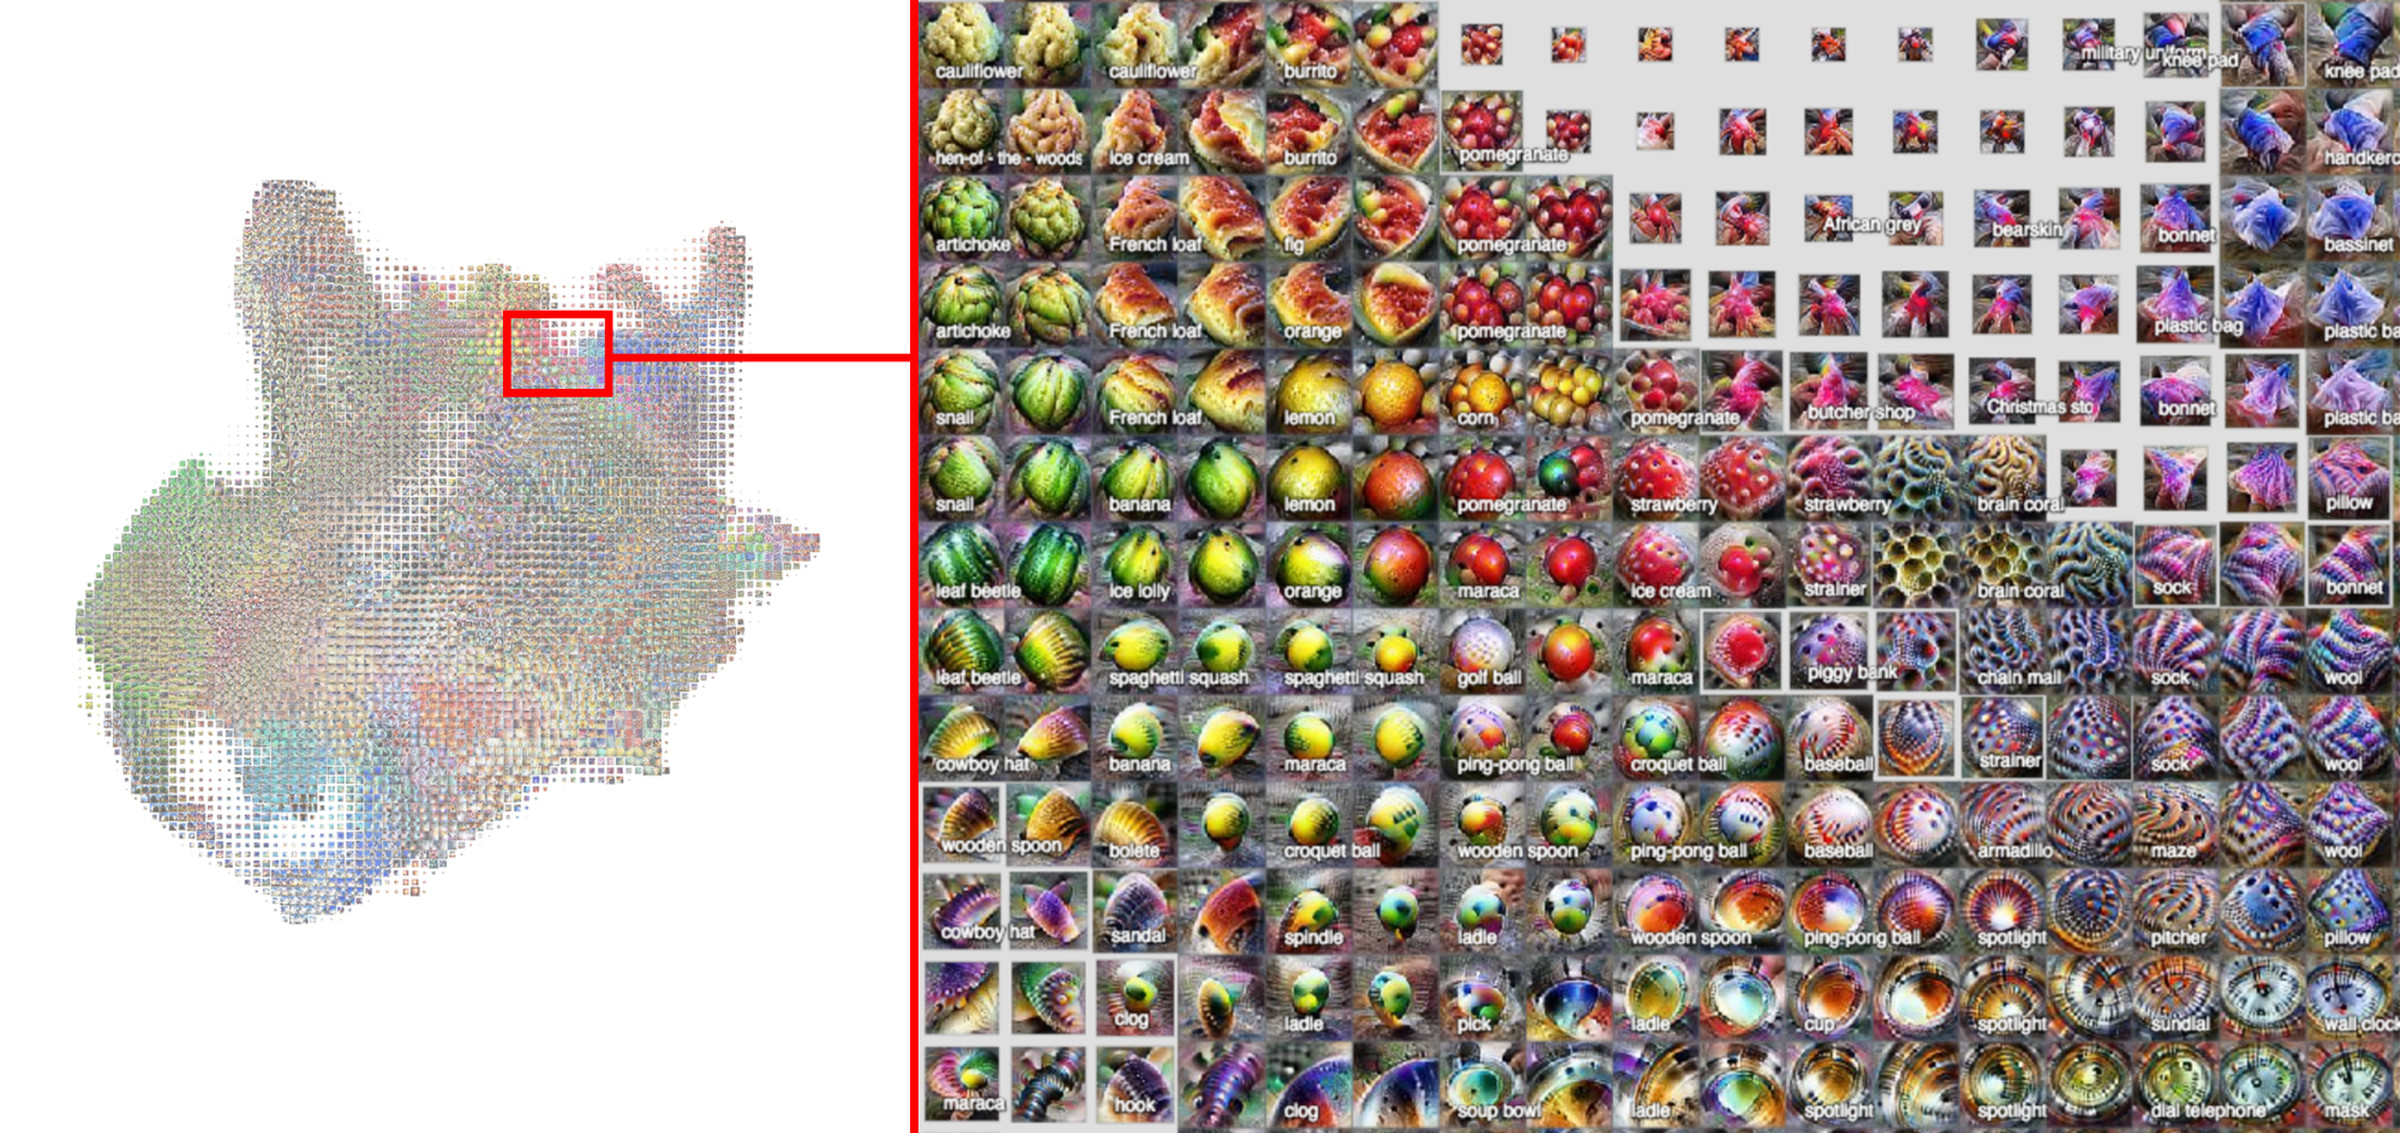 Activation Atlases let researchers map the visual data algorithms use to understand the world. 